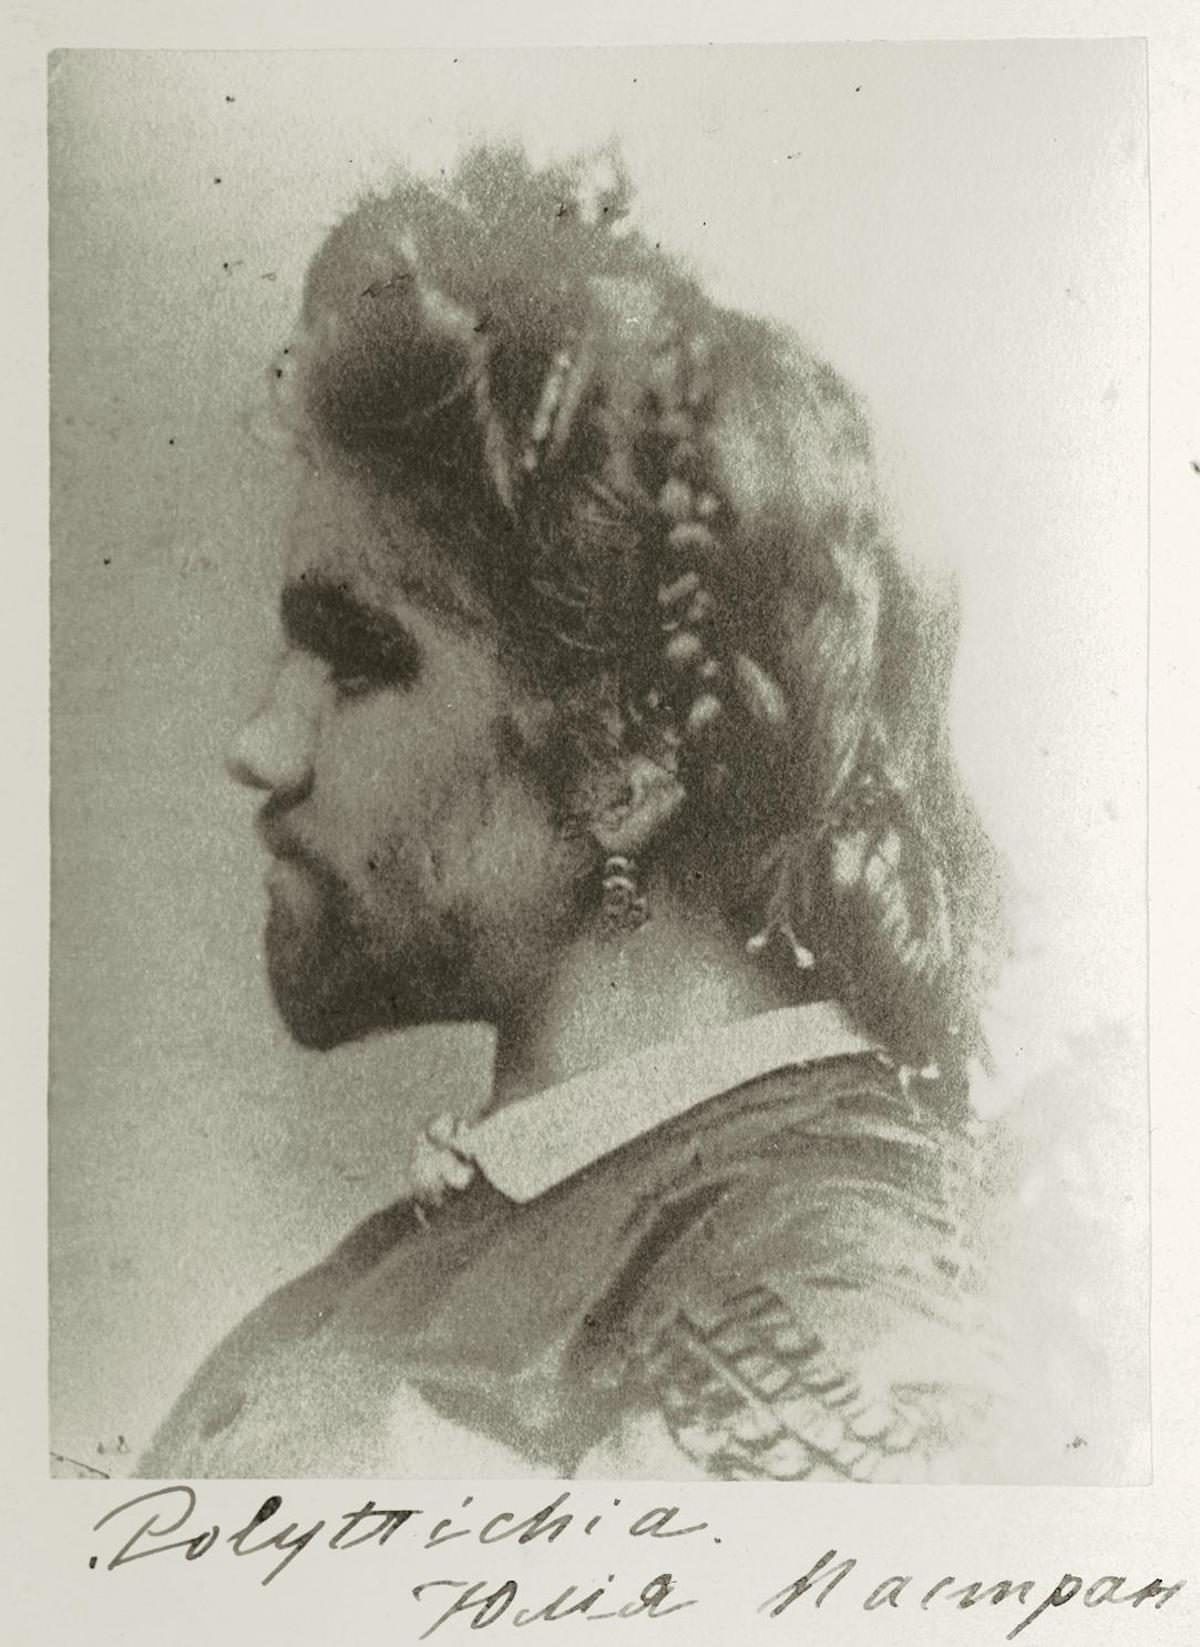 “The Bearded Lady” Julia Pastrana (1834–60), who toured Europe and North America in the 1850s (upper left). Pastrana died in childbirth while in Moscow in 1860.